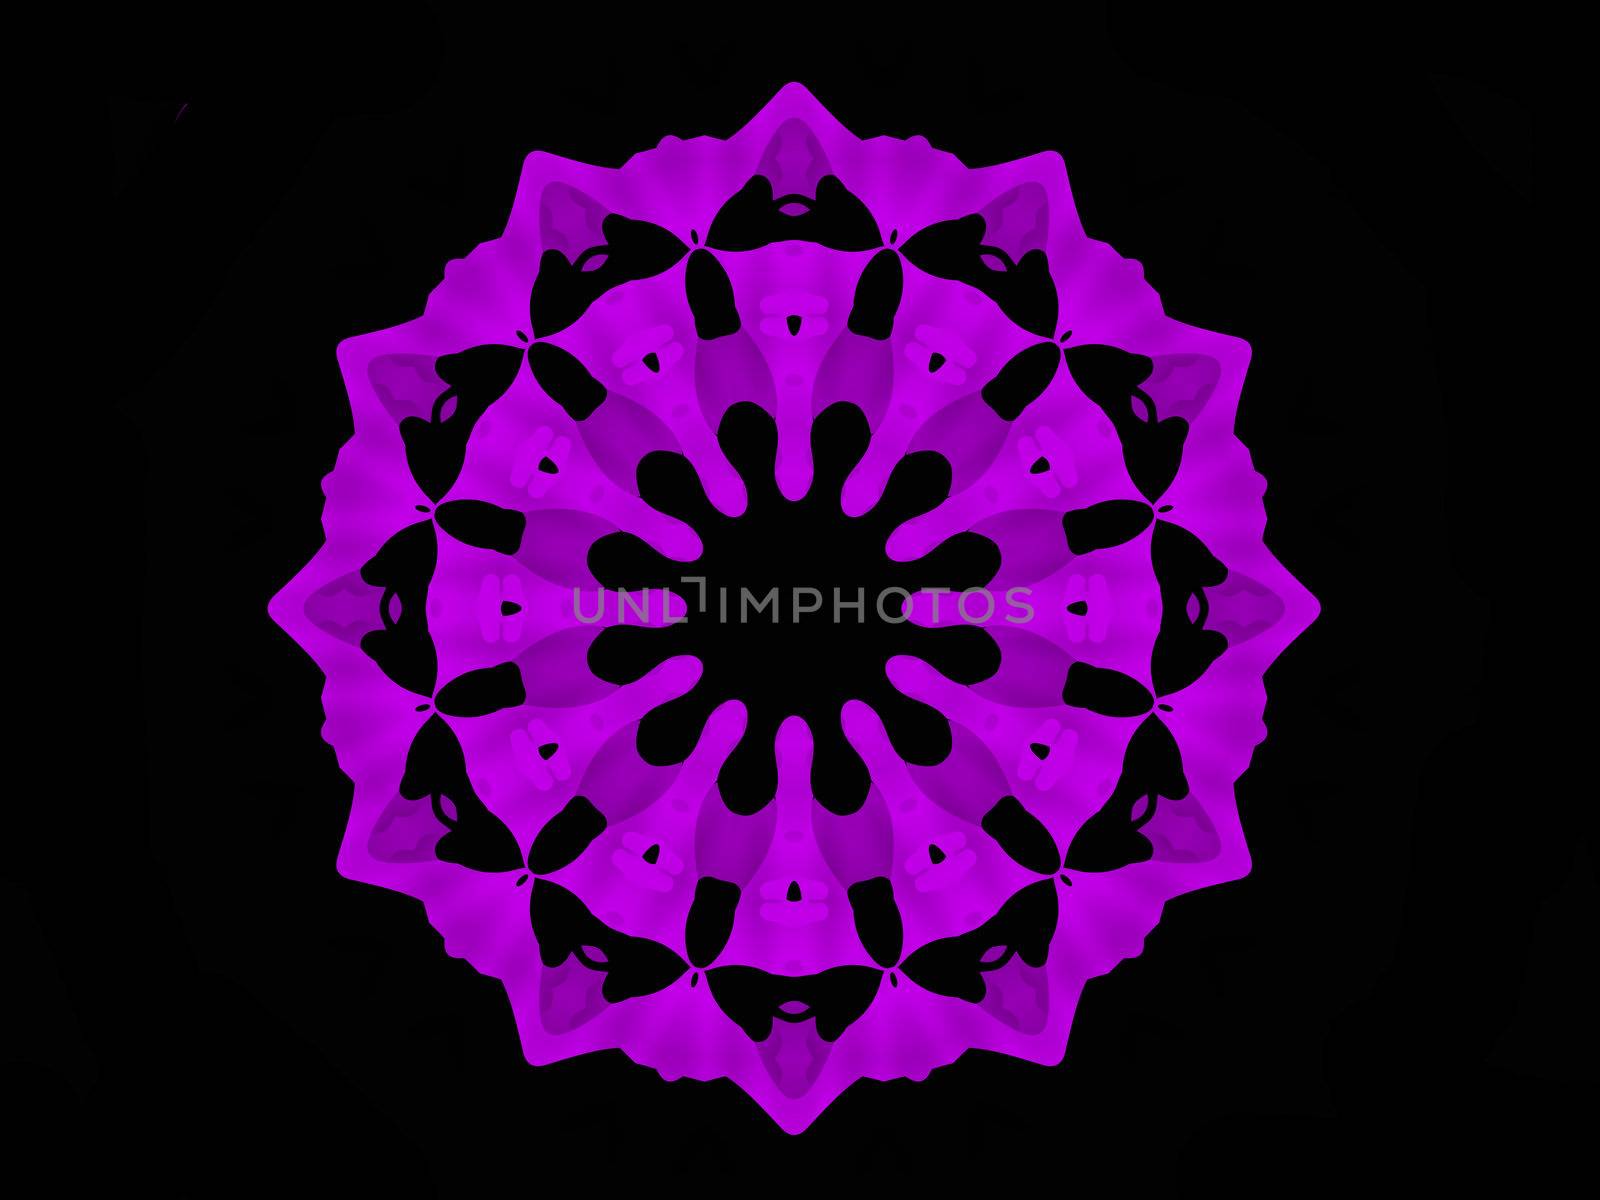 A circular mandala shaped fractal done in shades of mauve on a black background.